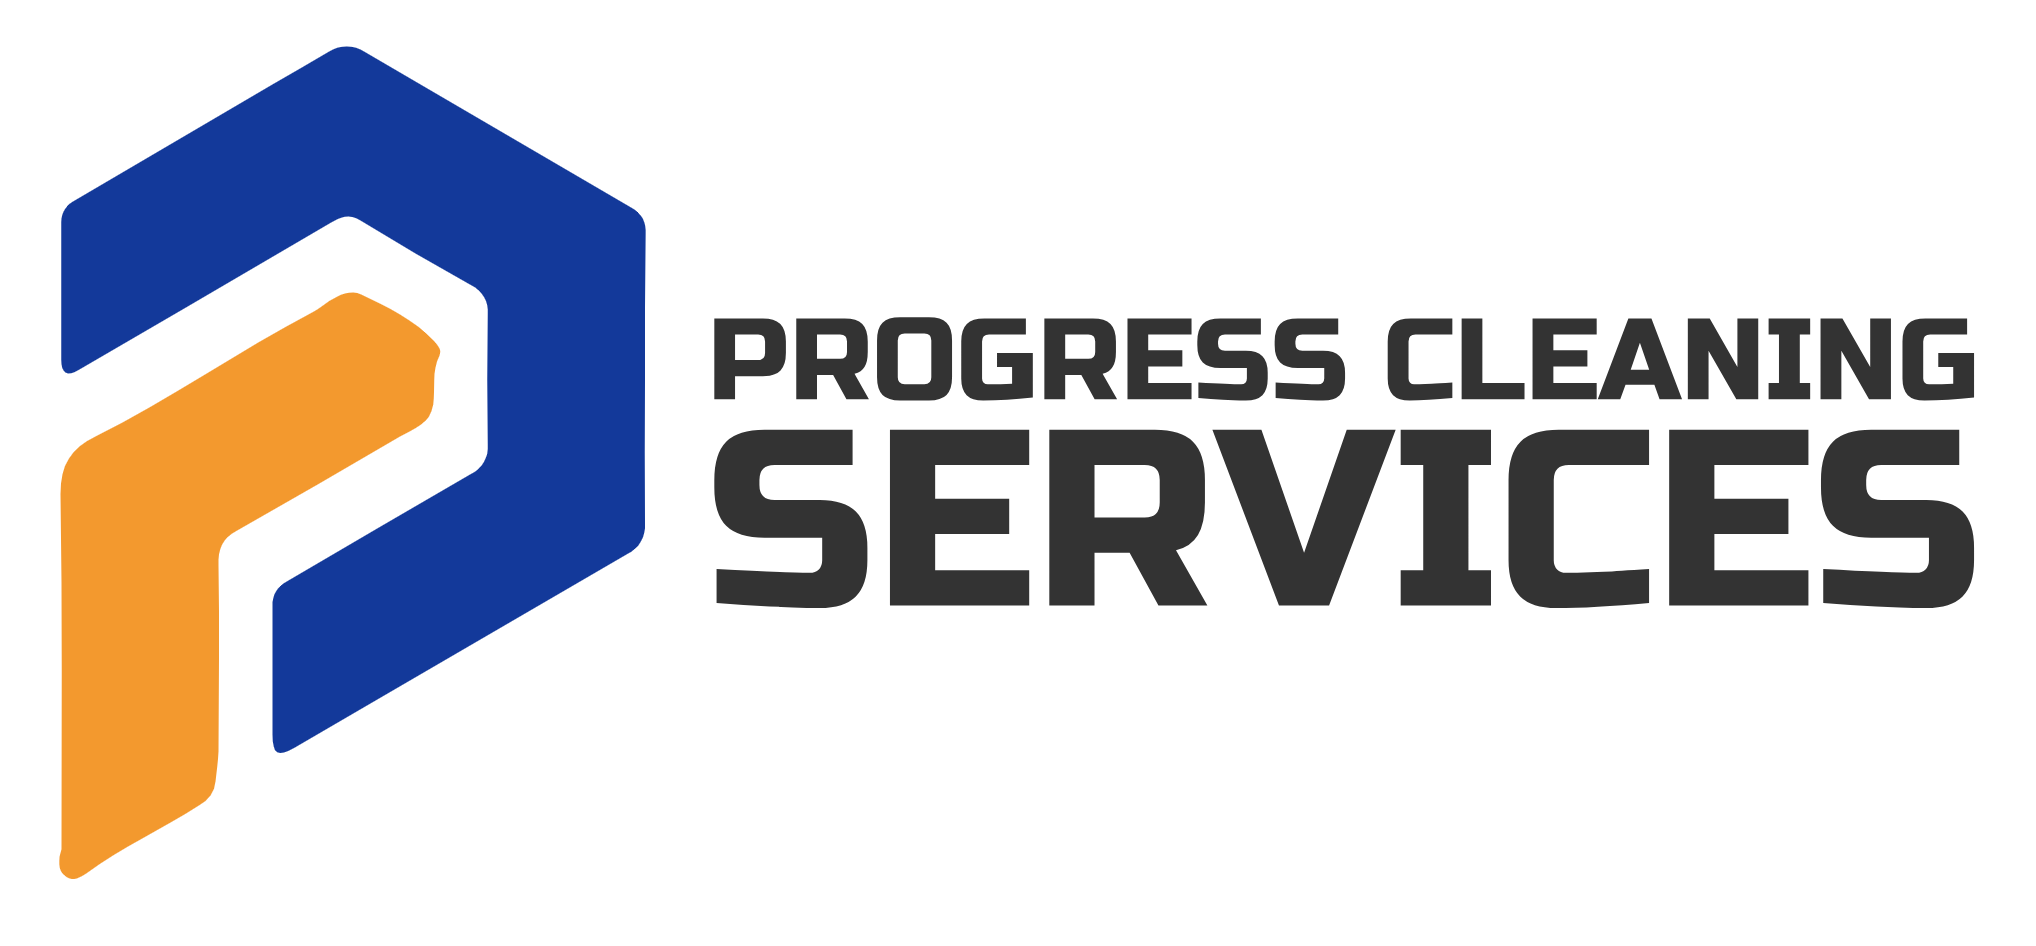 Progress Cleaning Services